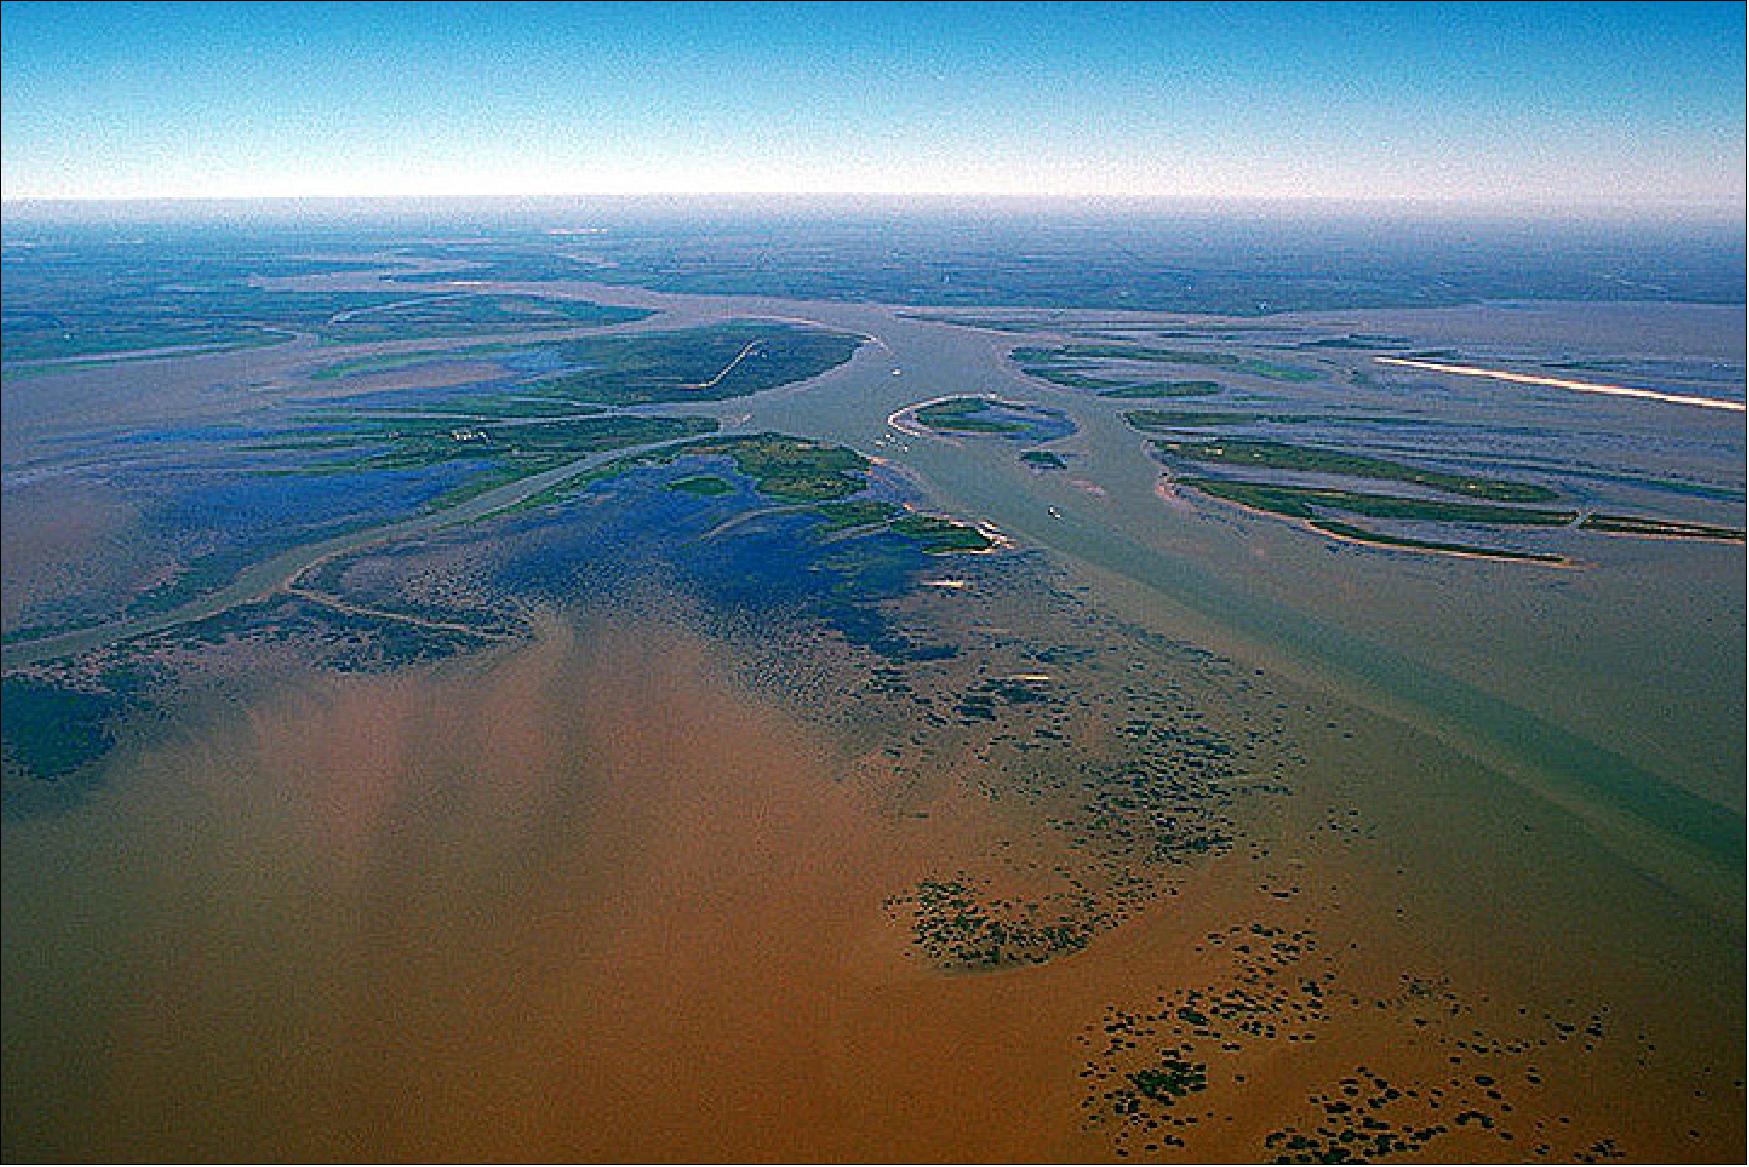 Figure 11: Aerial photograph of Atchafalaya Delta (image credit: photo by Arthur Belala, U.S. Army Corps of Engineers)